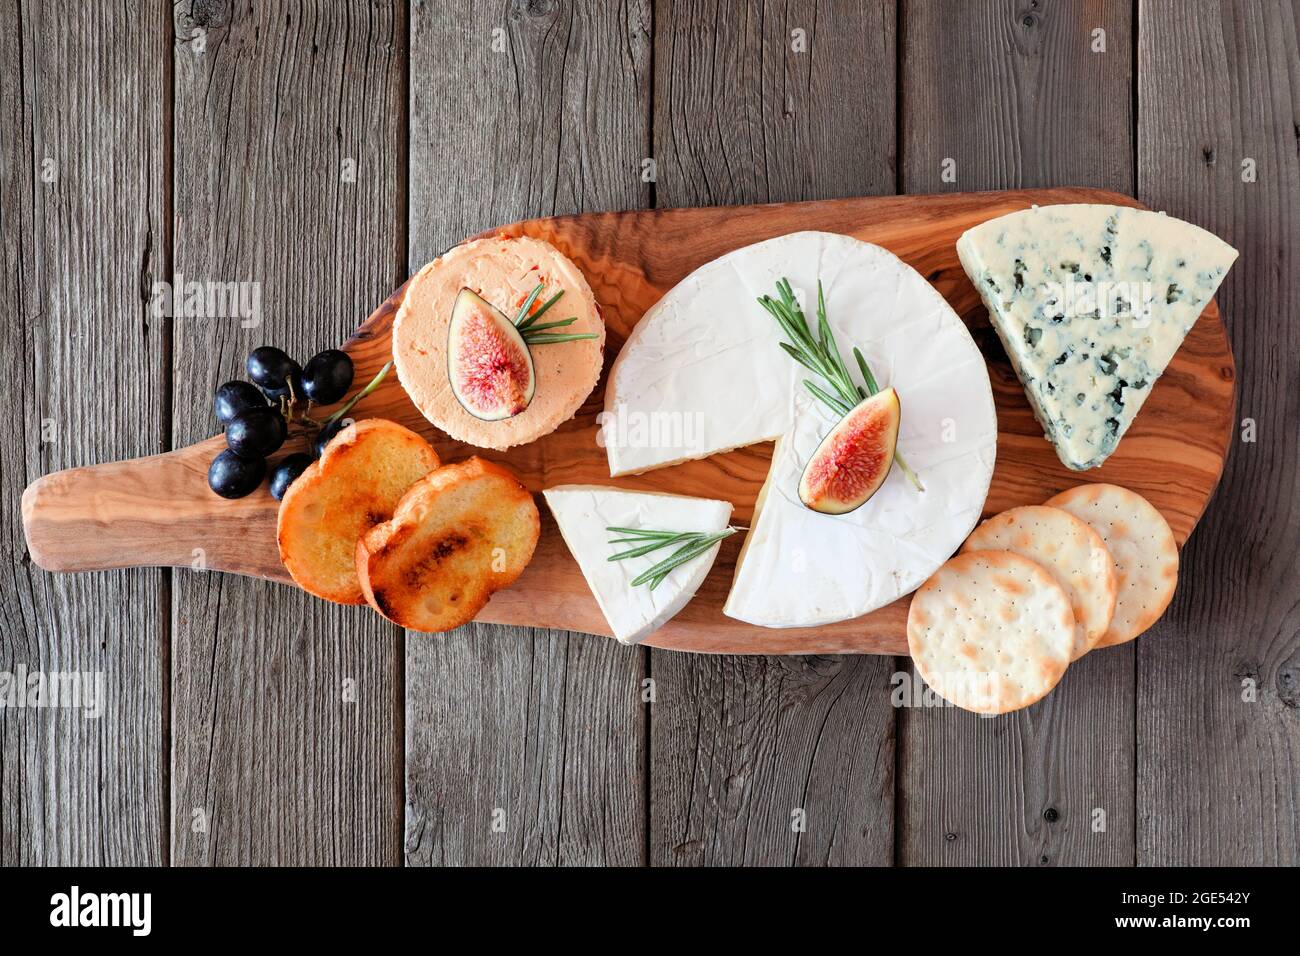 Cheese board with a selection of cheeses, crackers, figs and grapes on wooden serving board. Above view on a rustic wood background. Stock Photo